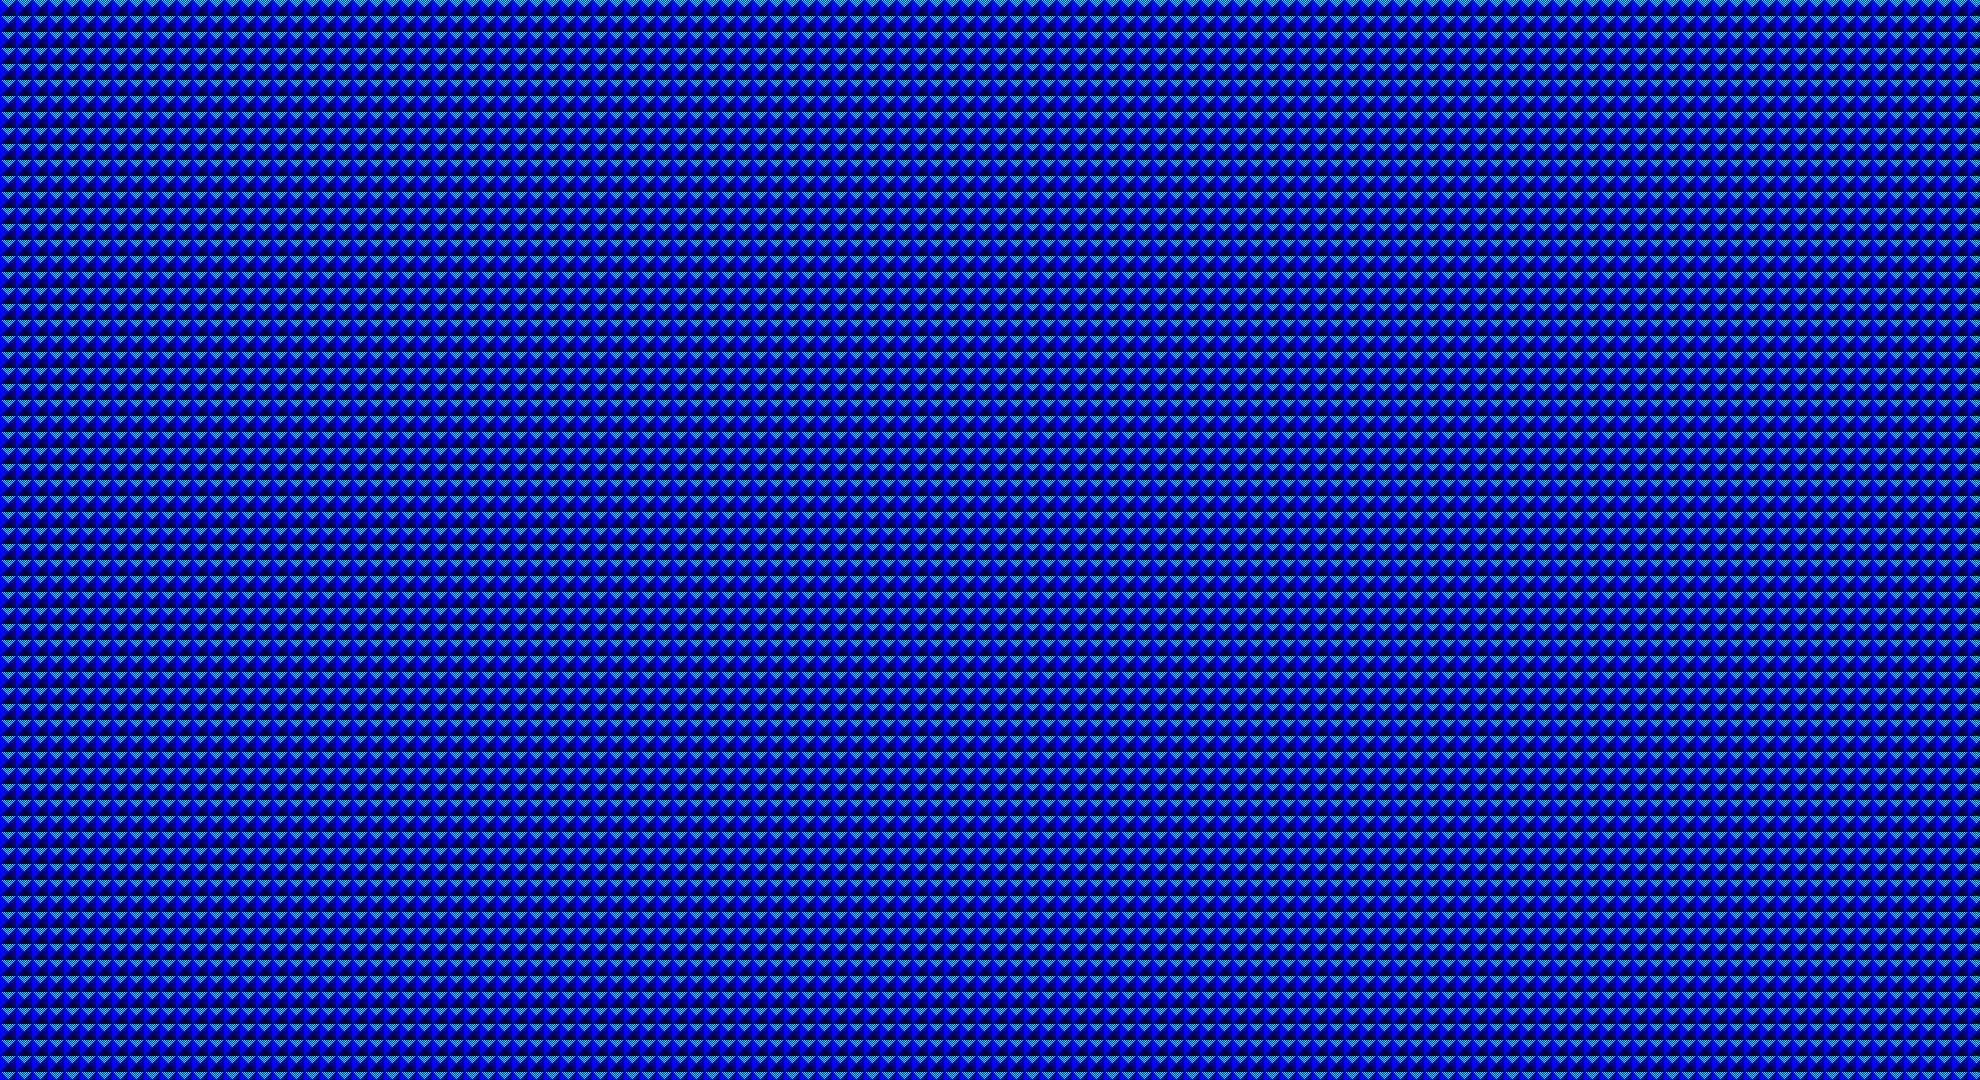 A blue LED screen with a dot pattern. - Windows 95